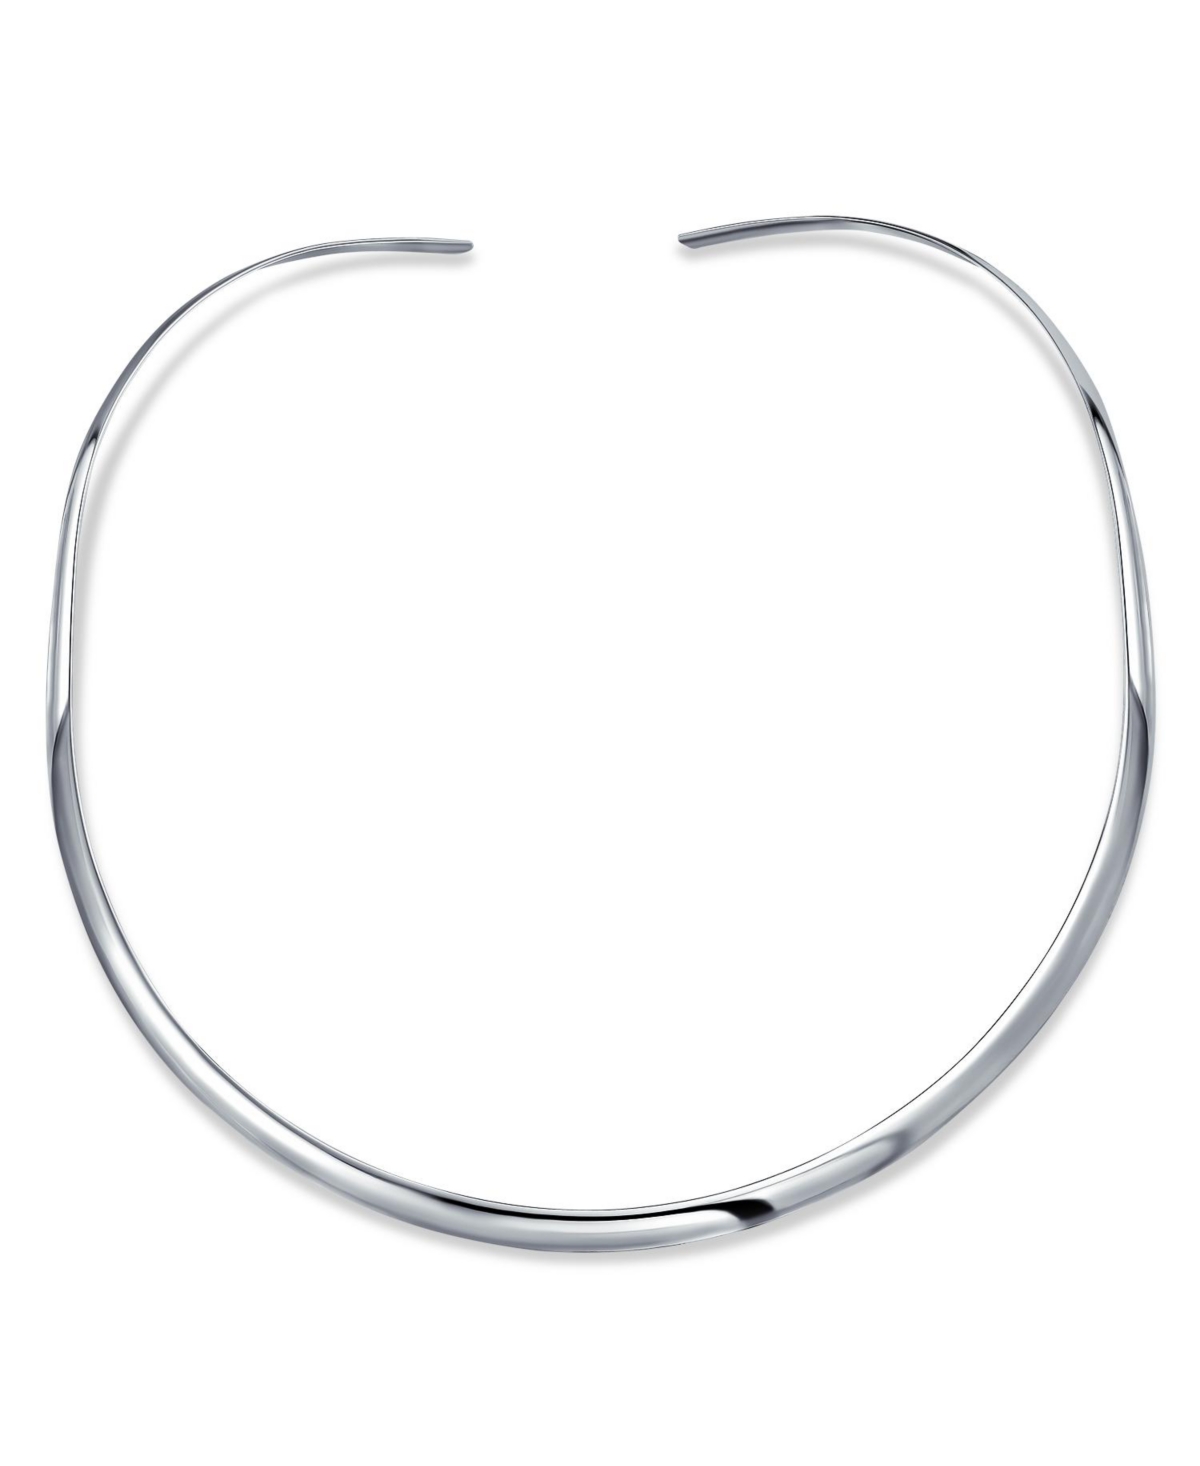 Basic Simple Thin Flat Choker Slider Open Collar Contoured Statement Necklace For Women .925 Silver Sterling 4MM - Silver